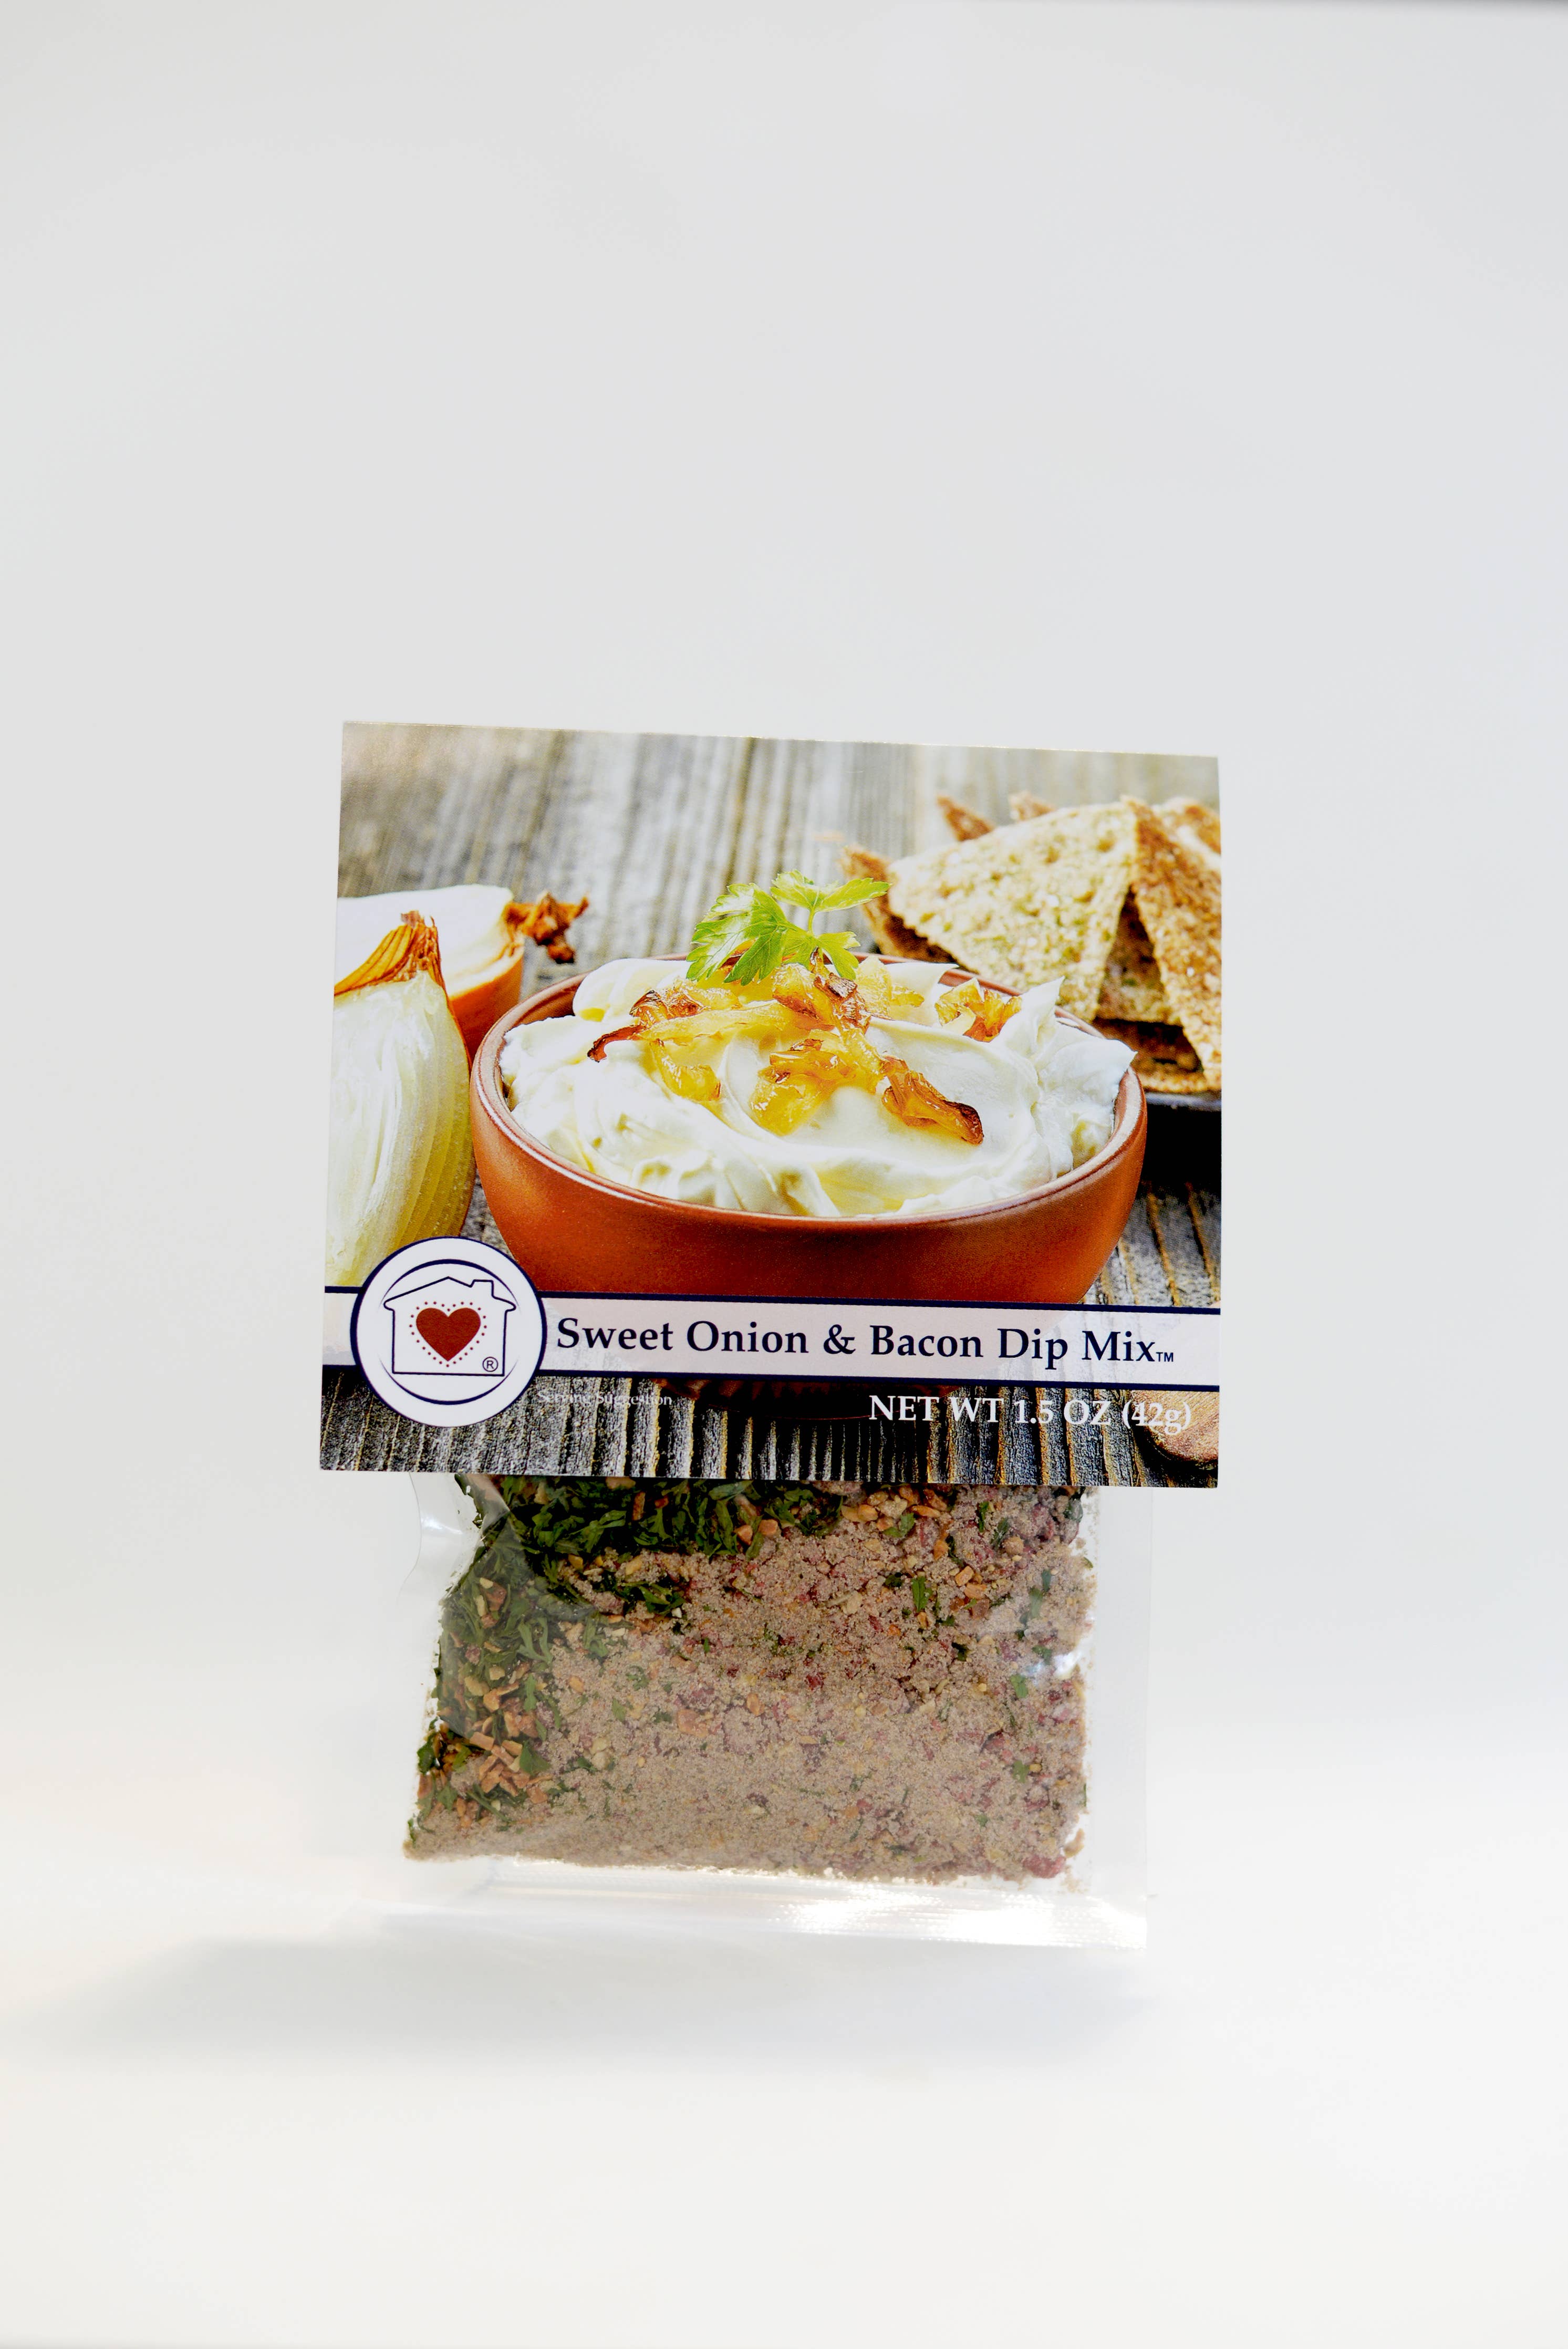 Sweet Onion & Bacon Dip Mix by Country Home Creations